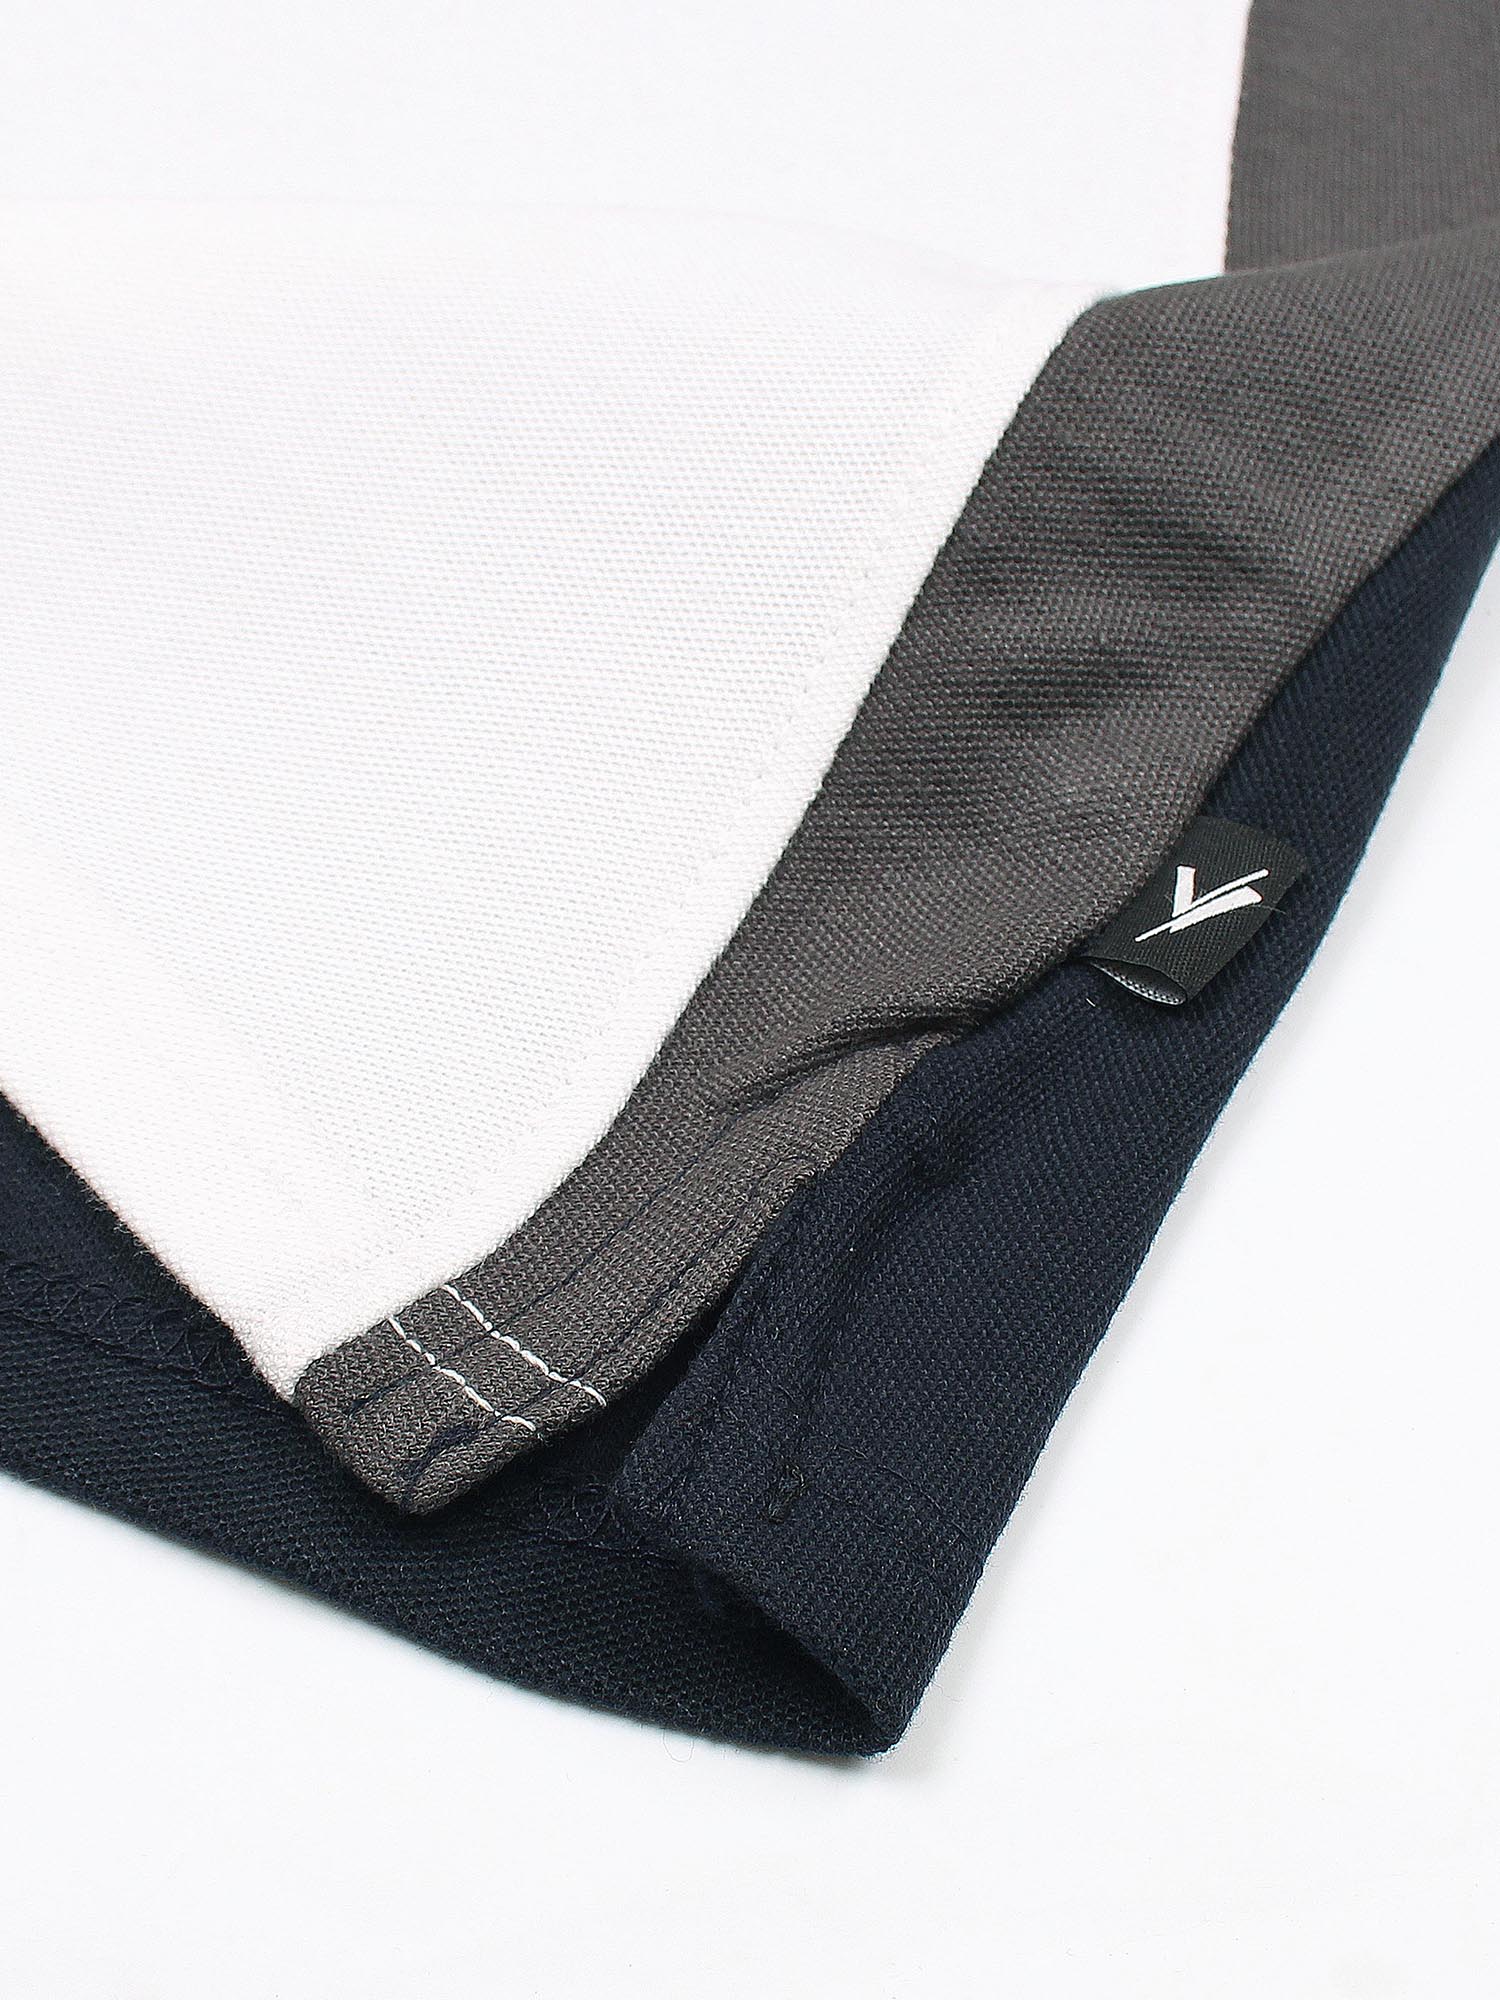 Tipping Collar Boys Polo Shirt Velvour Embroidered  Navy And White